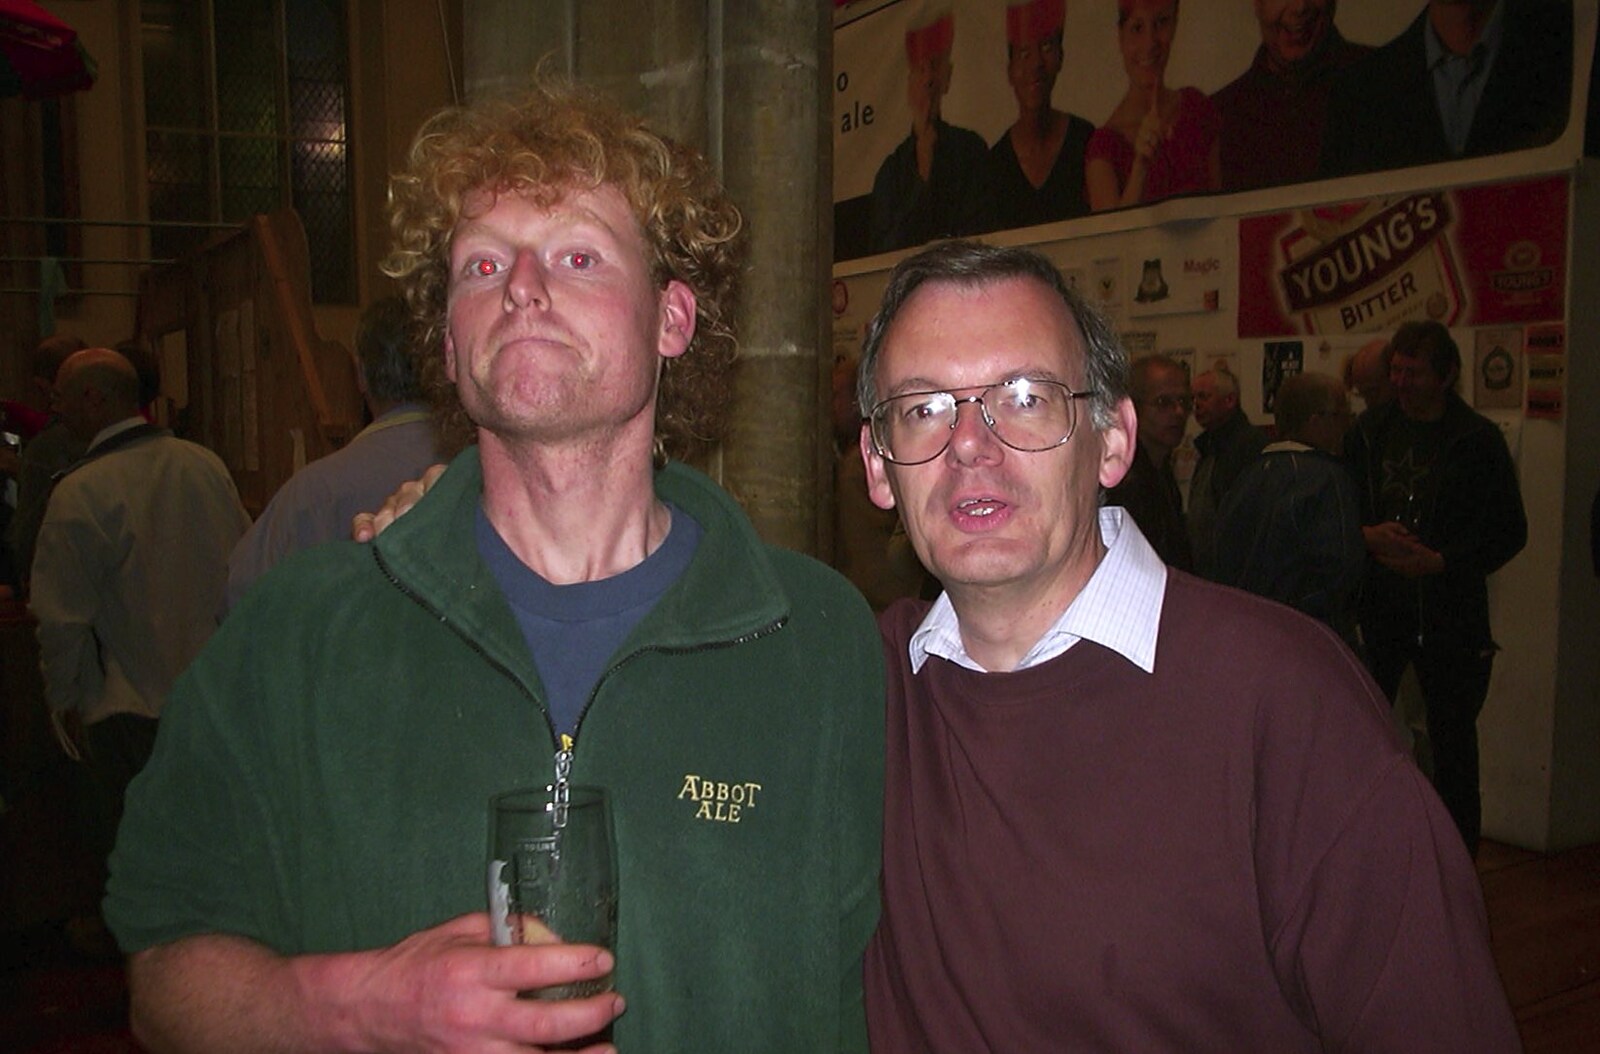 Wavy and Ping Pong Peter from The Brome Swan at the Norwich Beer Festival, St. Andrew's Hall, Norwich - 29th October 2003